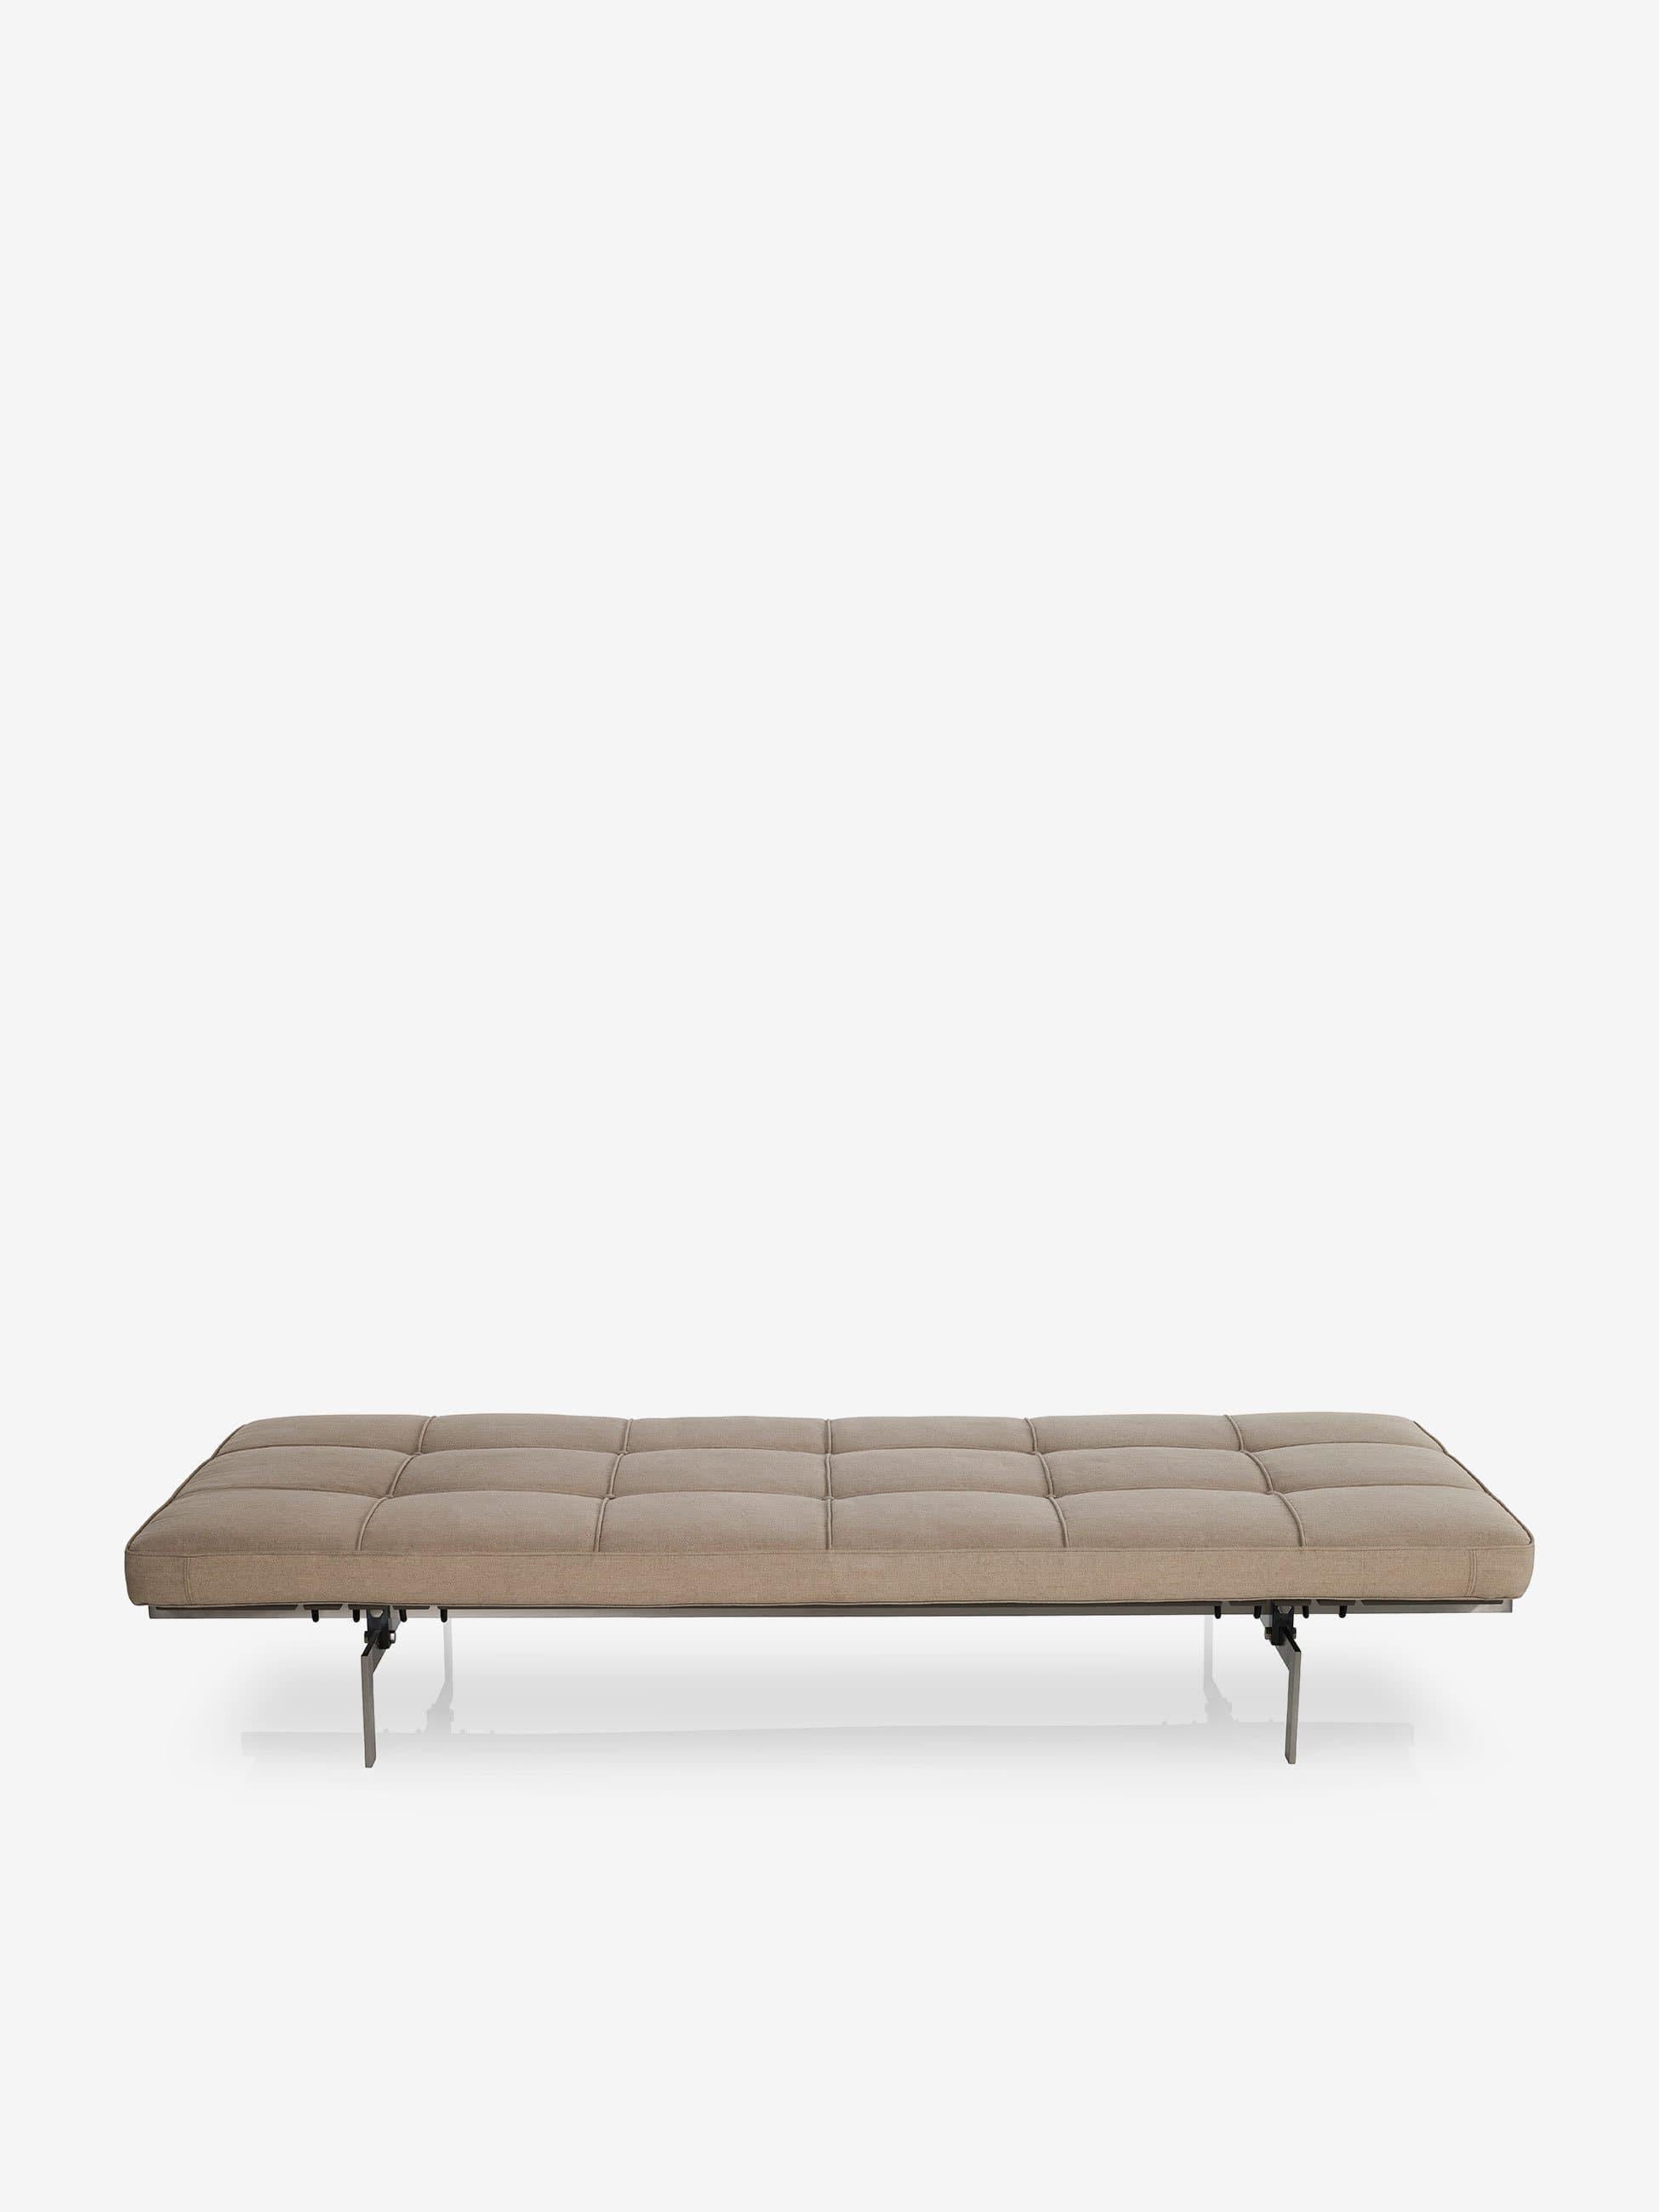 Poul Kjaerholm PK80 Daybed in Natural Canvas by Fritz Hansen In New Condition For Sale In Sag Harbor, NY